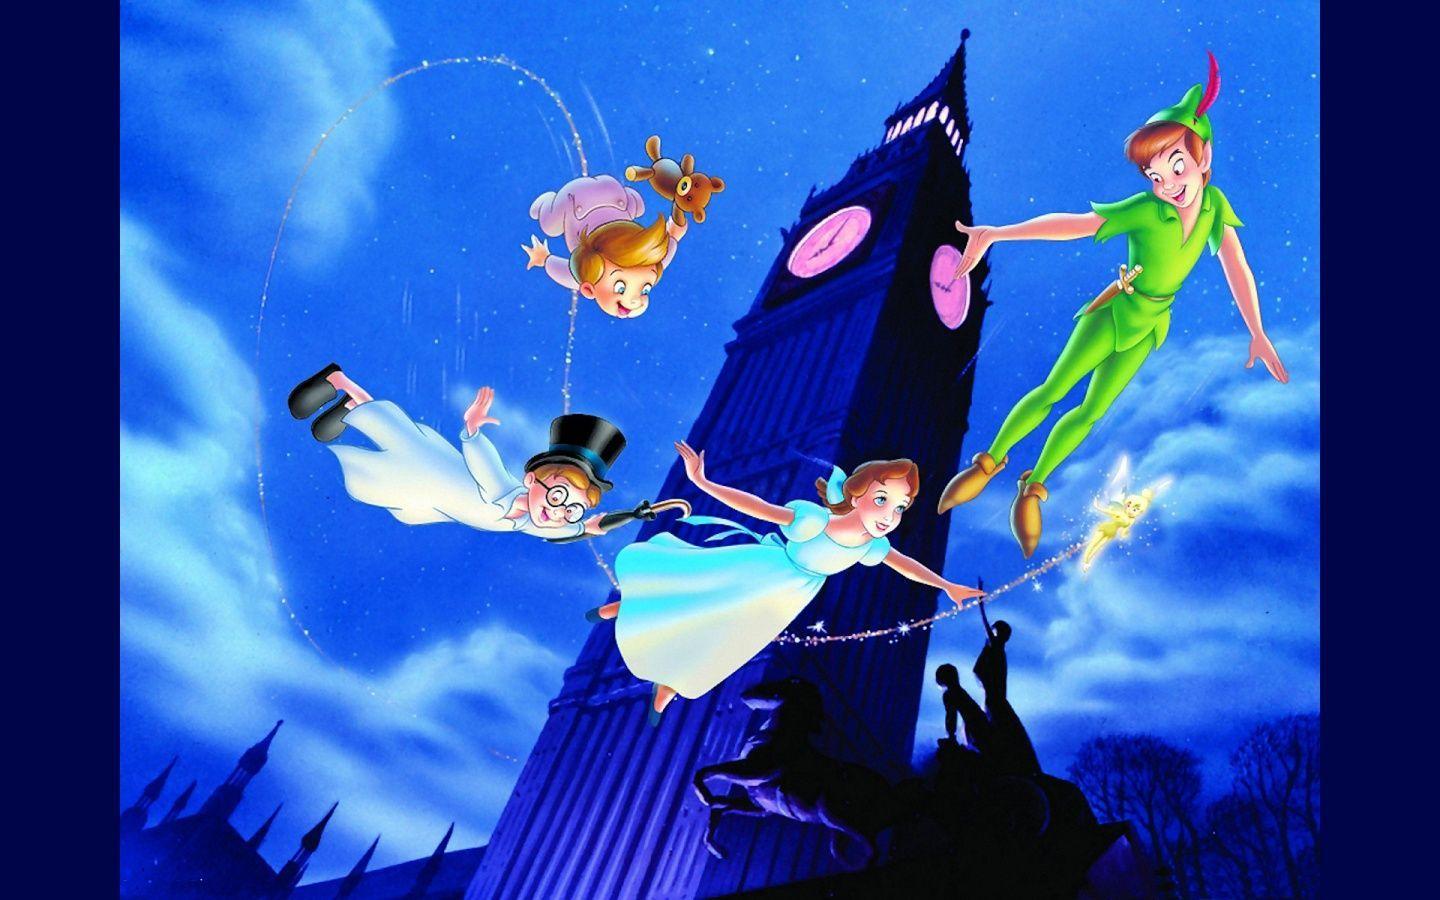 Movies: Peter Pan With Friends, picture nr. 35657